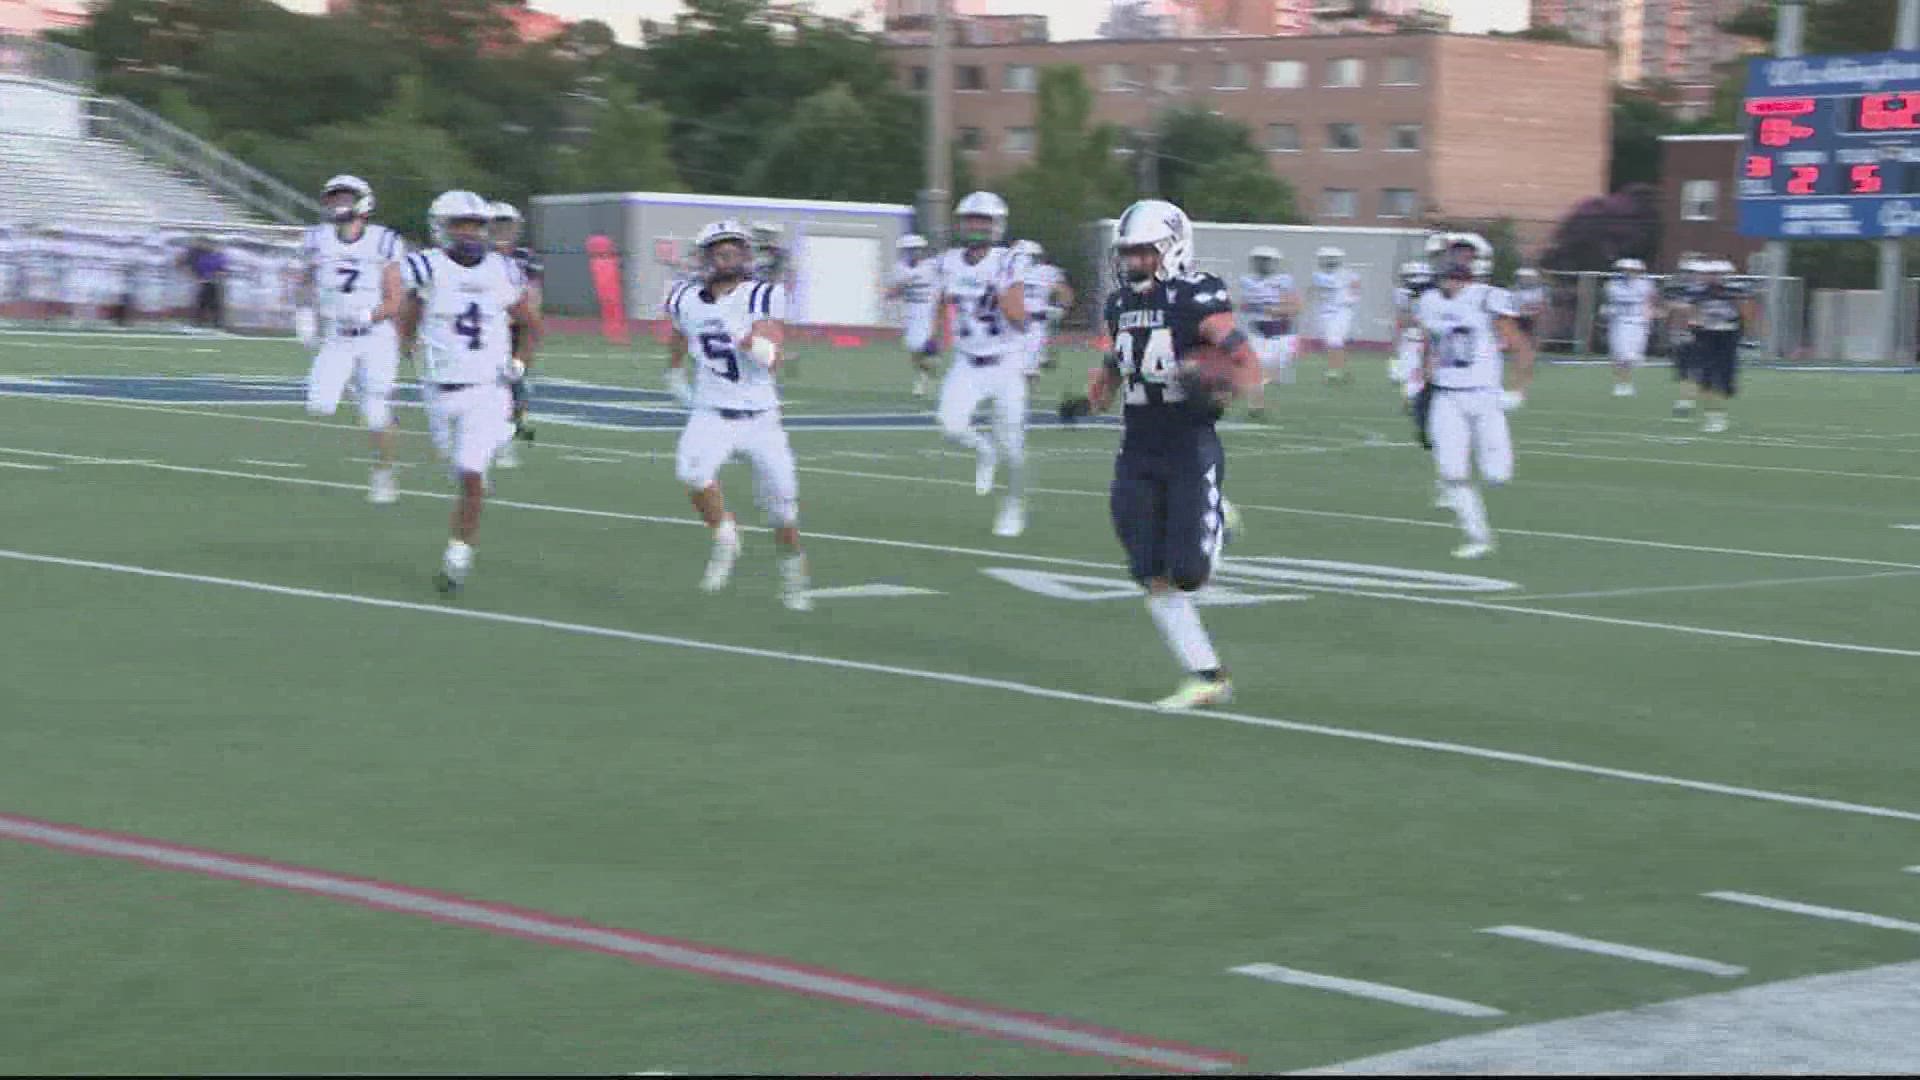 The WUSA9's Game of the Week is Chantilly against Washington Liberty.